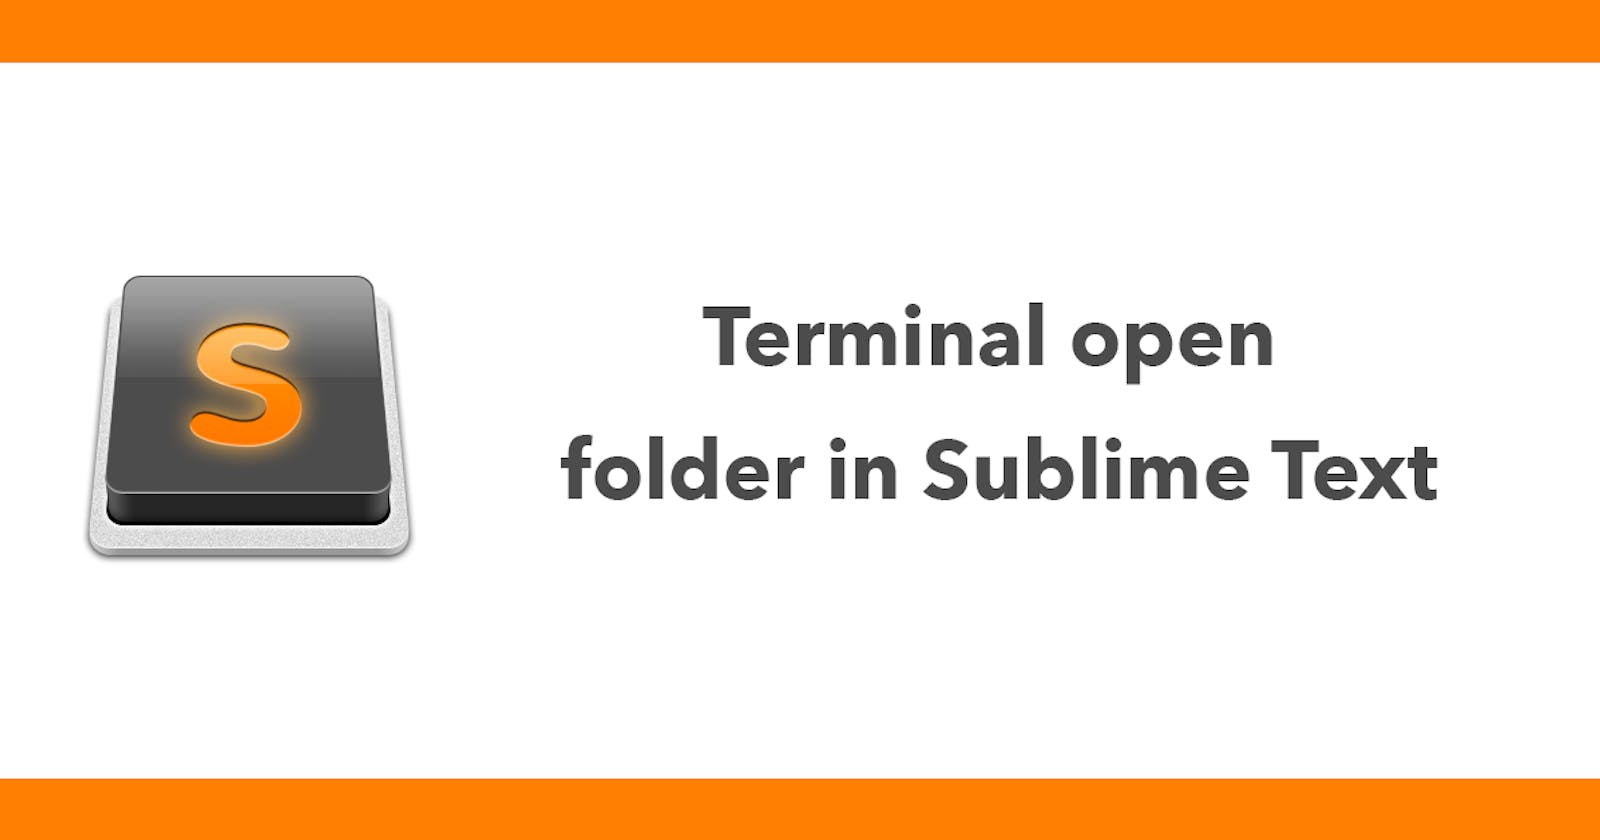 Terminal open folder in Sublime Text